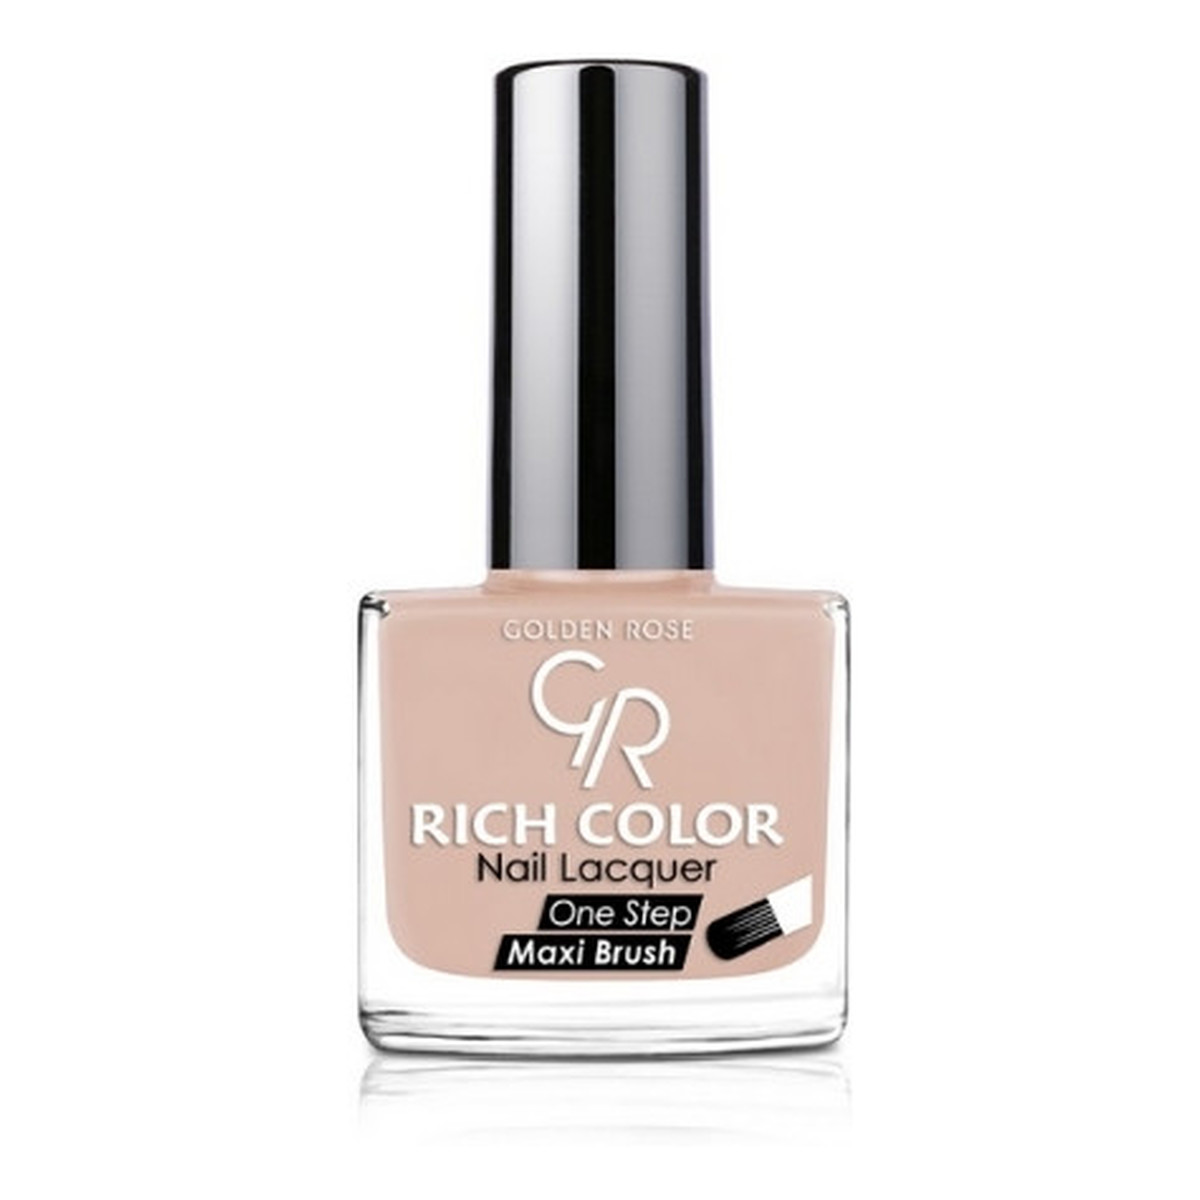 Golden Rose Rich Color Nail Lacquer Trwały Lakier do paznokci 10.5ml 10ml